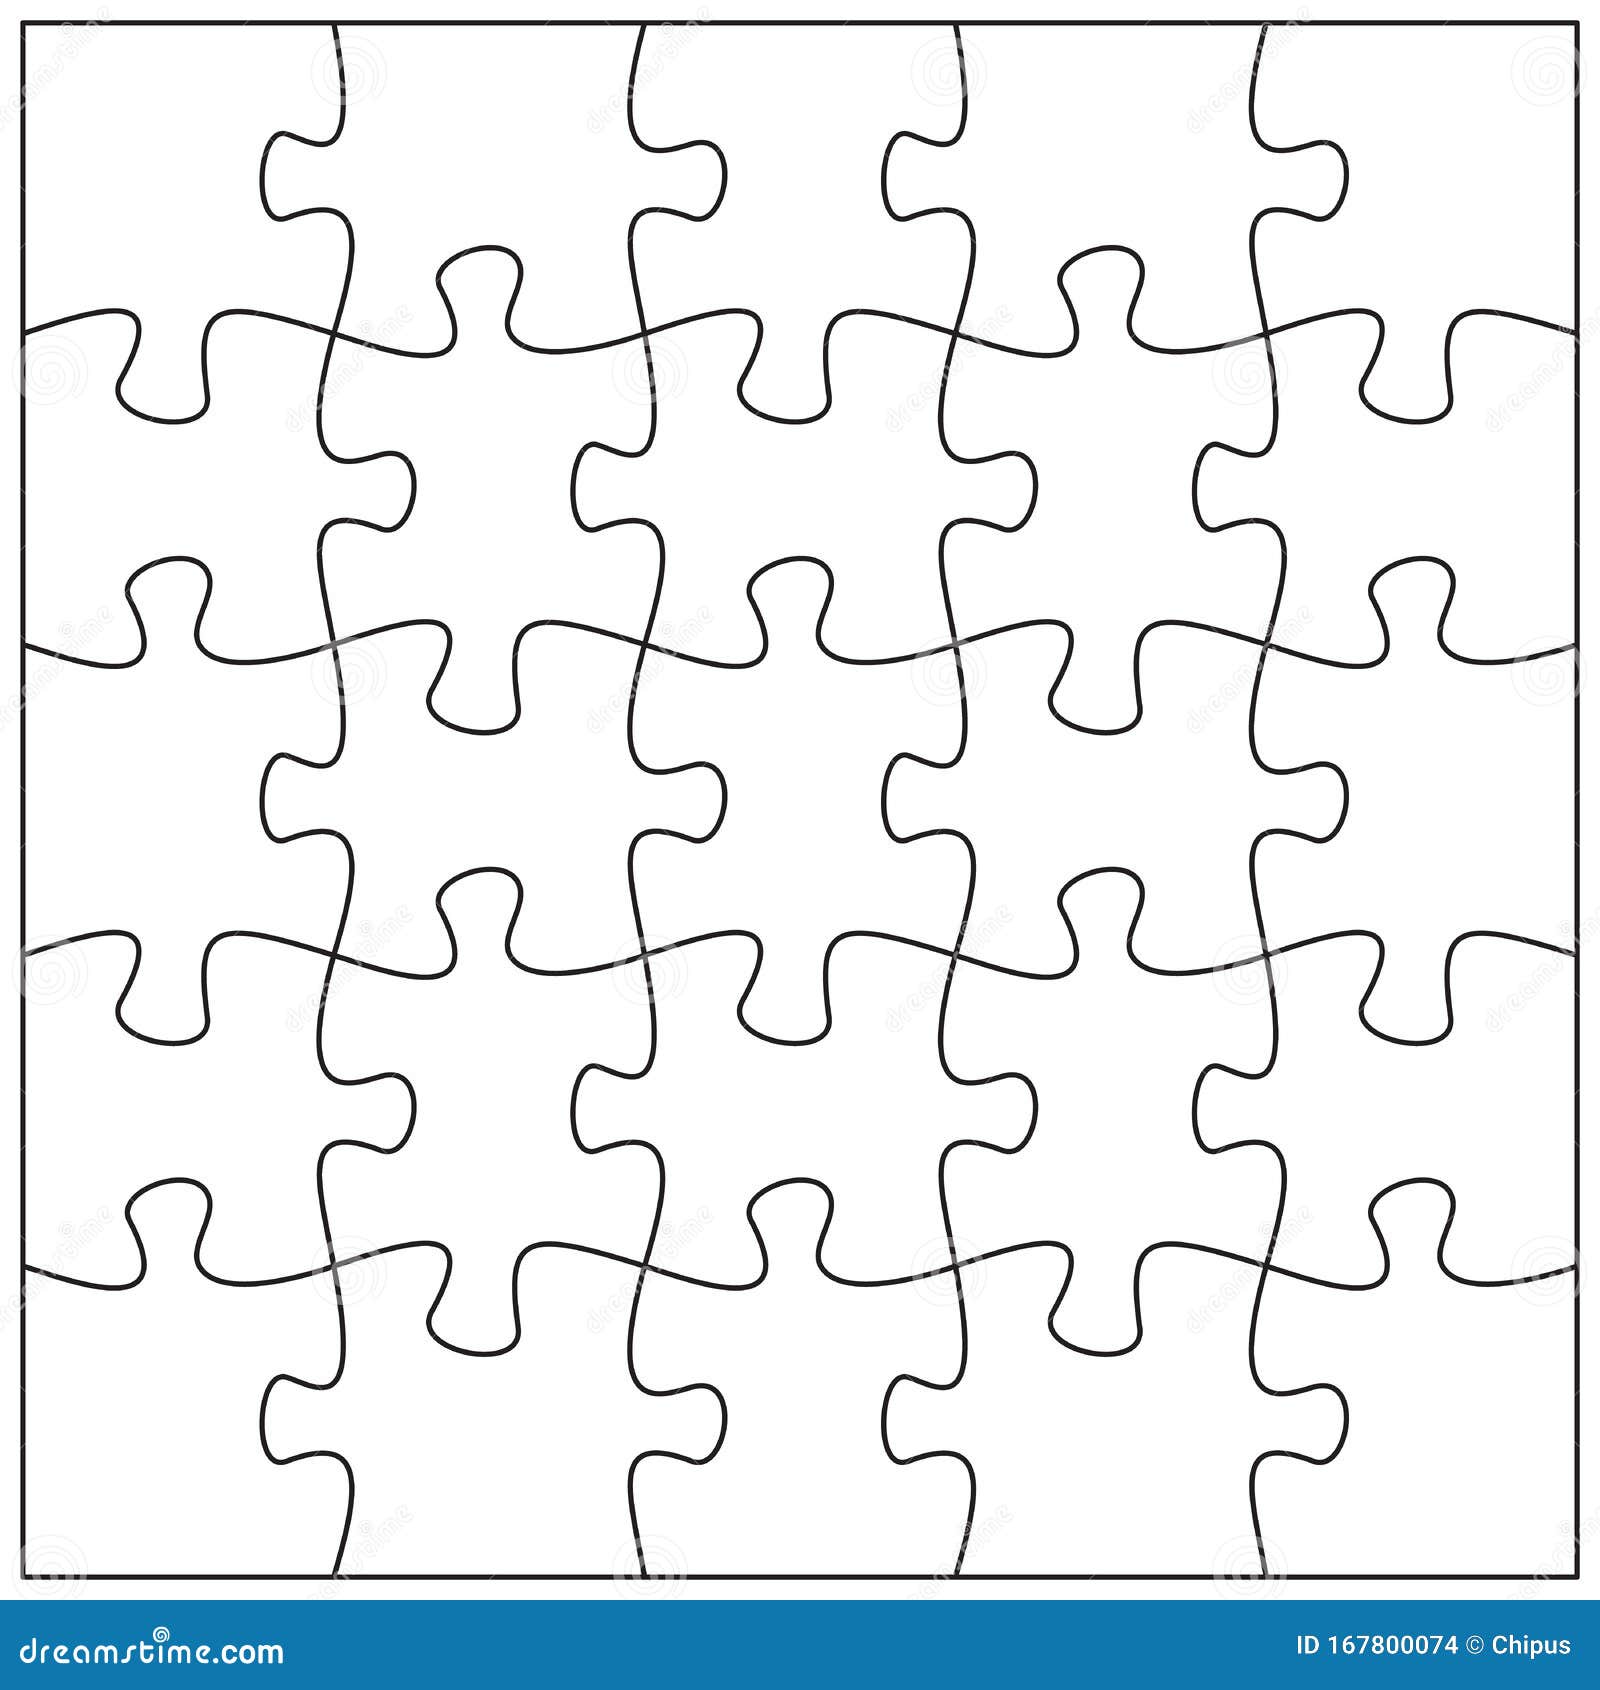 20 Jigsaw Pieces Template. Twenty Puzzle Pieces Connected Together